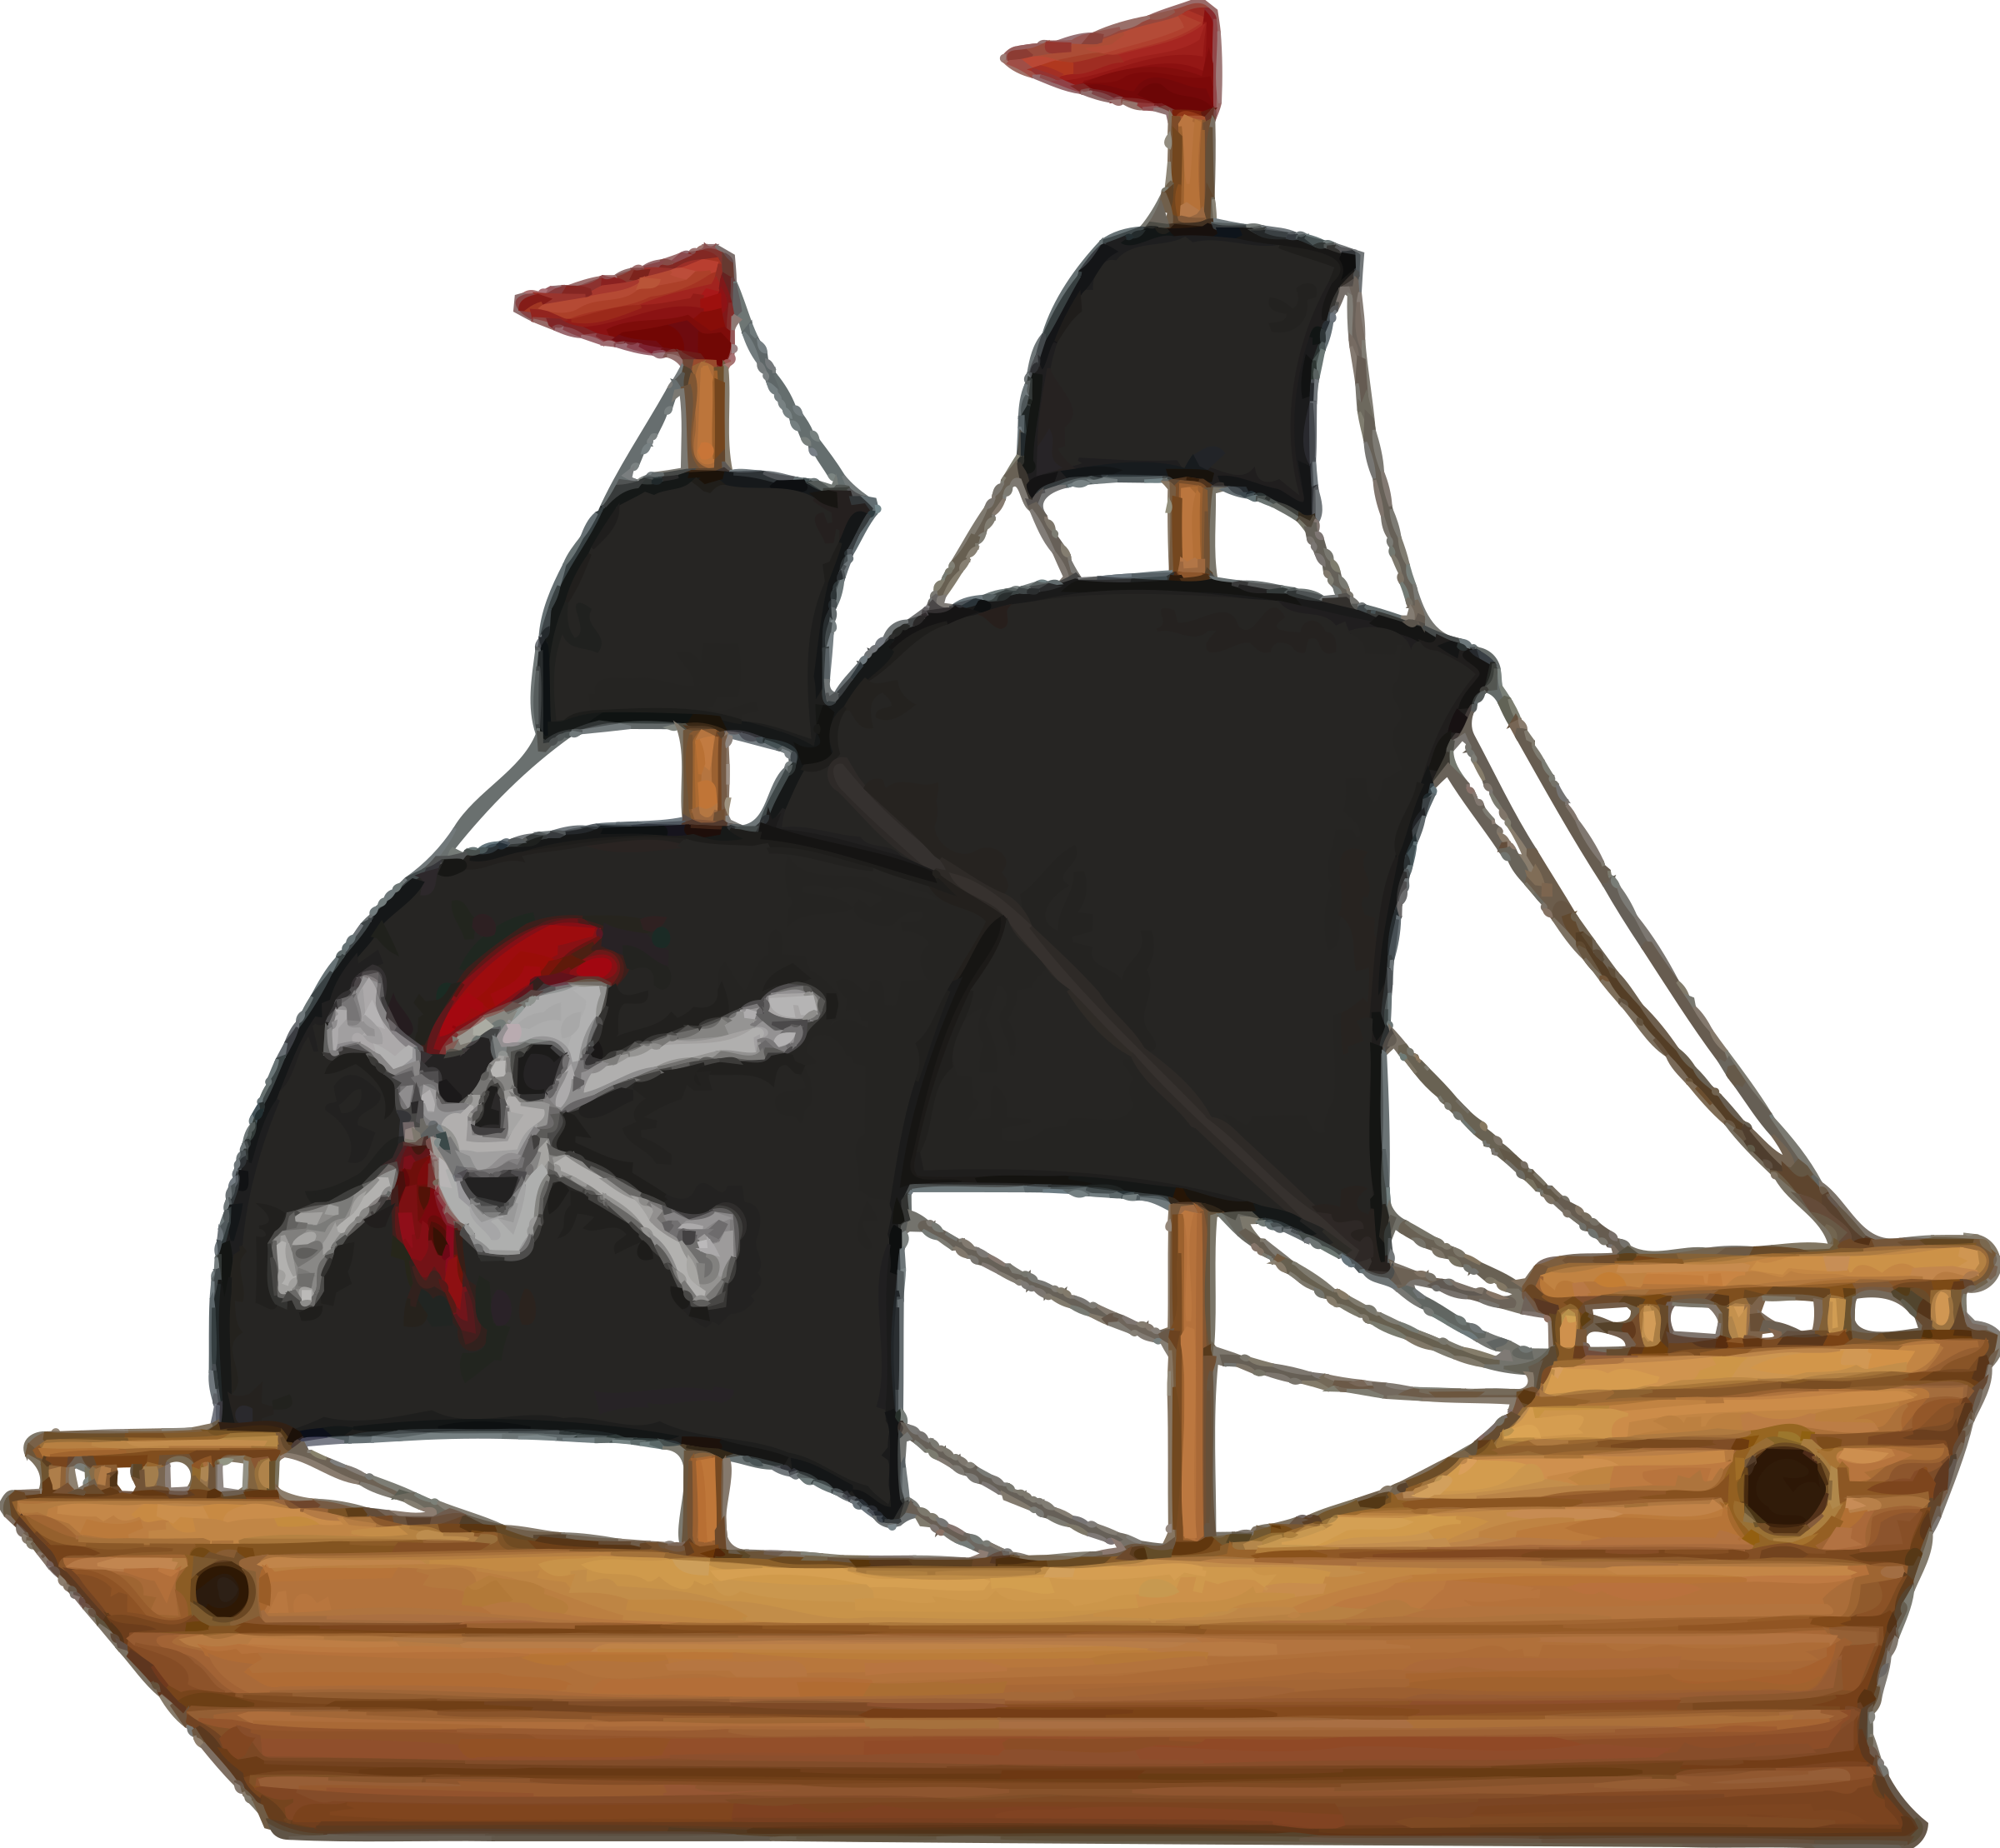 Pirate Ship Vector Clipart image